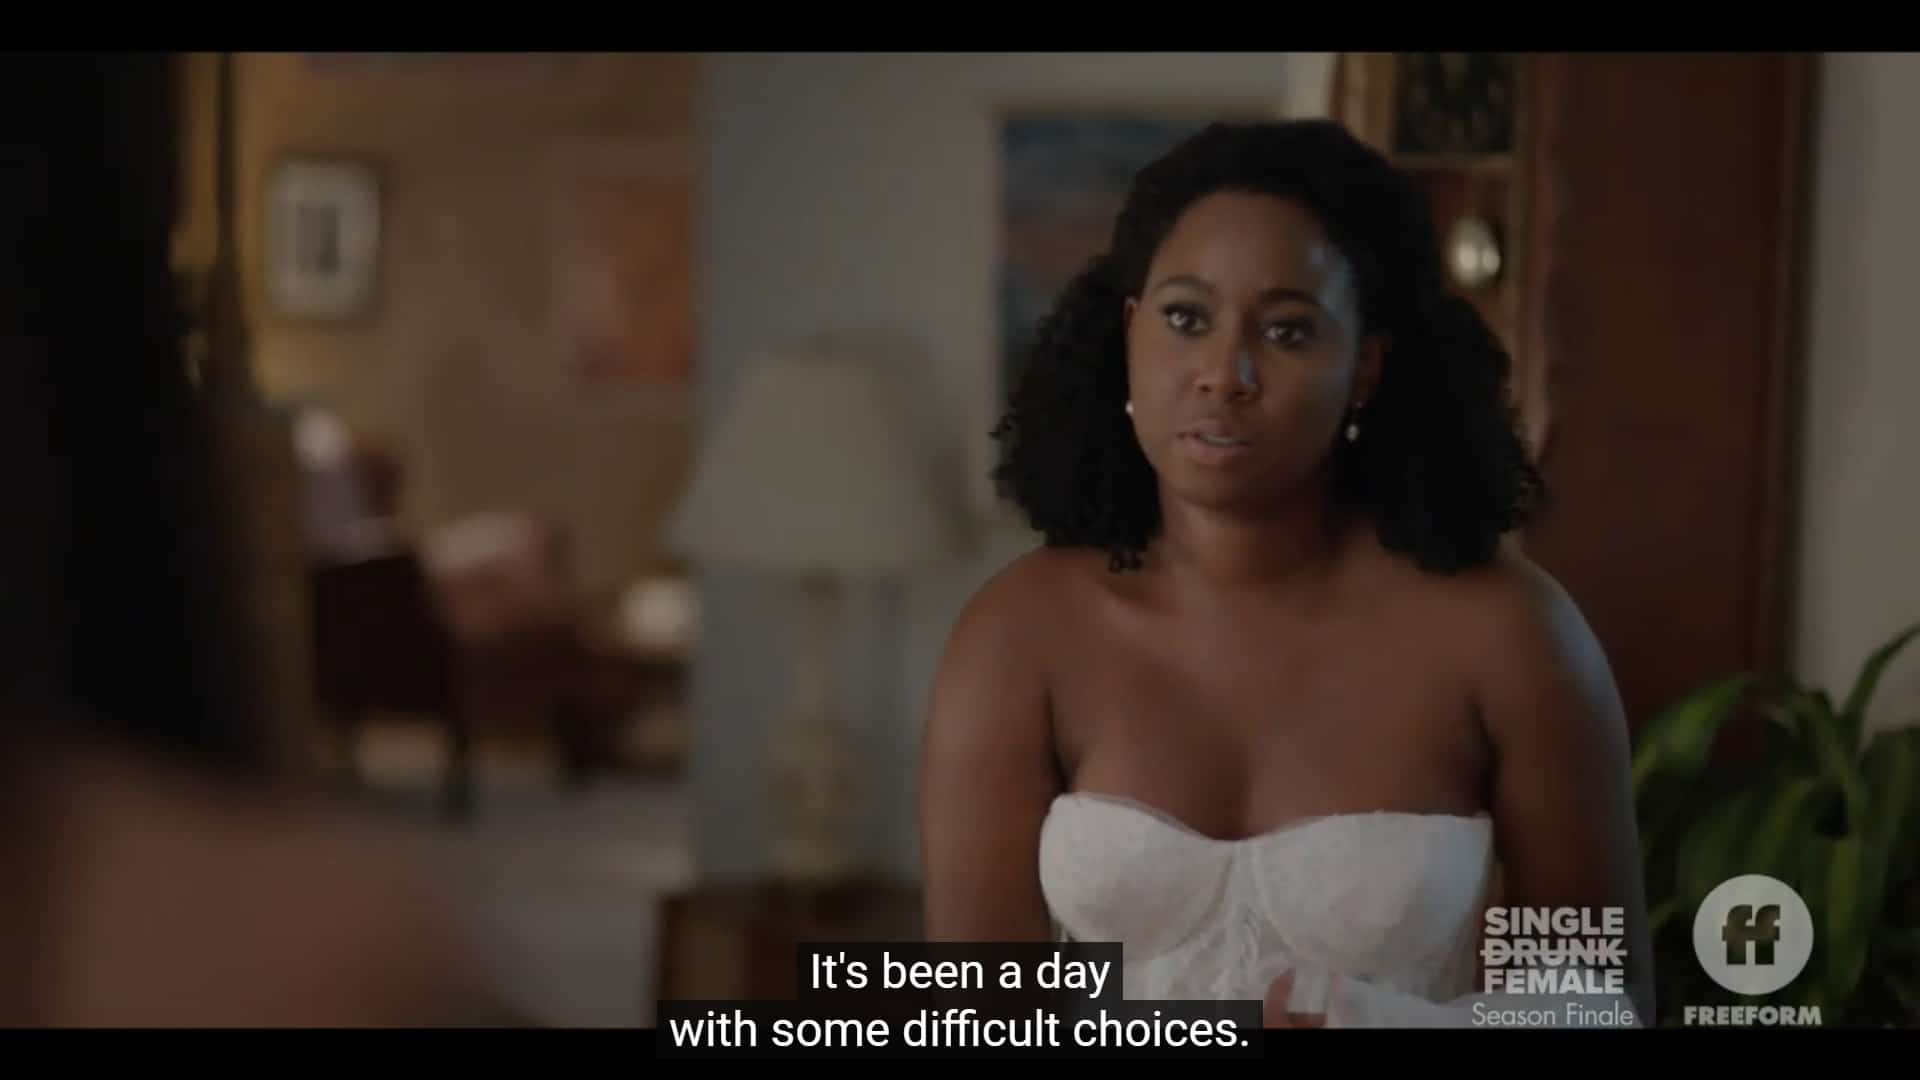 Brit struggling with the decisions she made on her weddign day